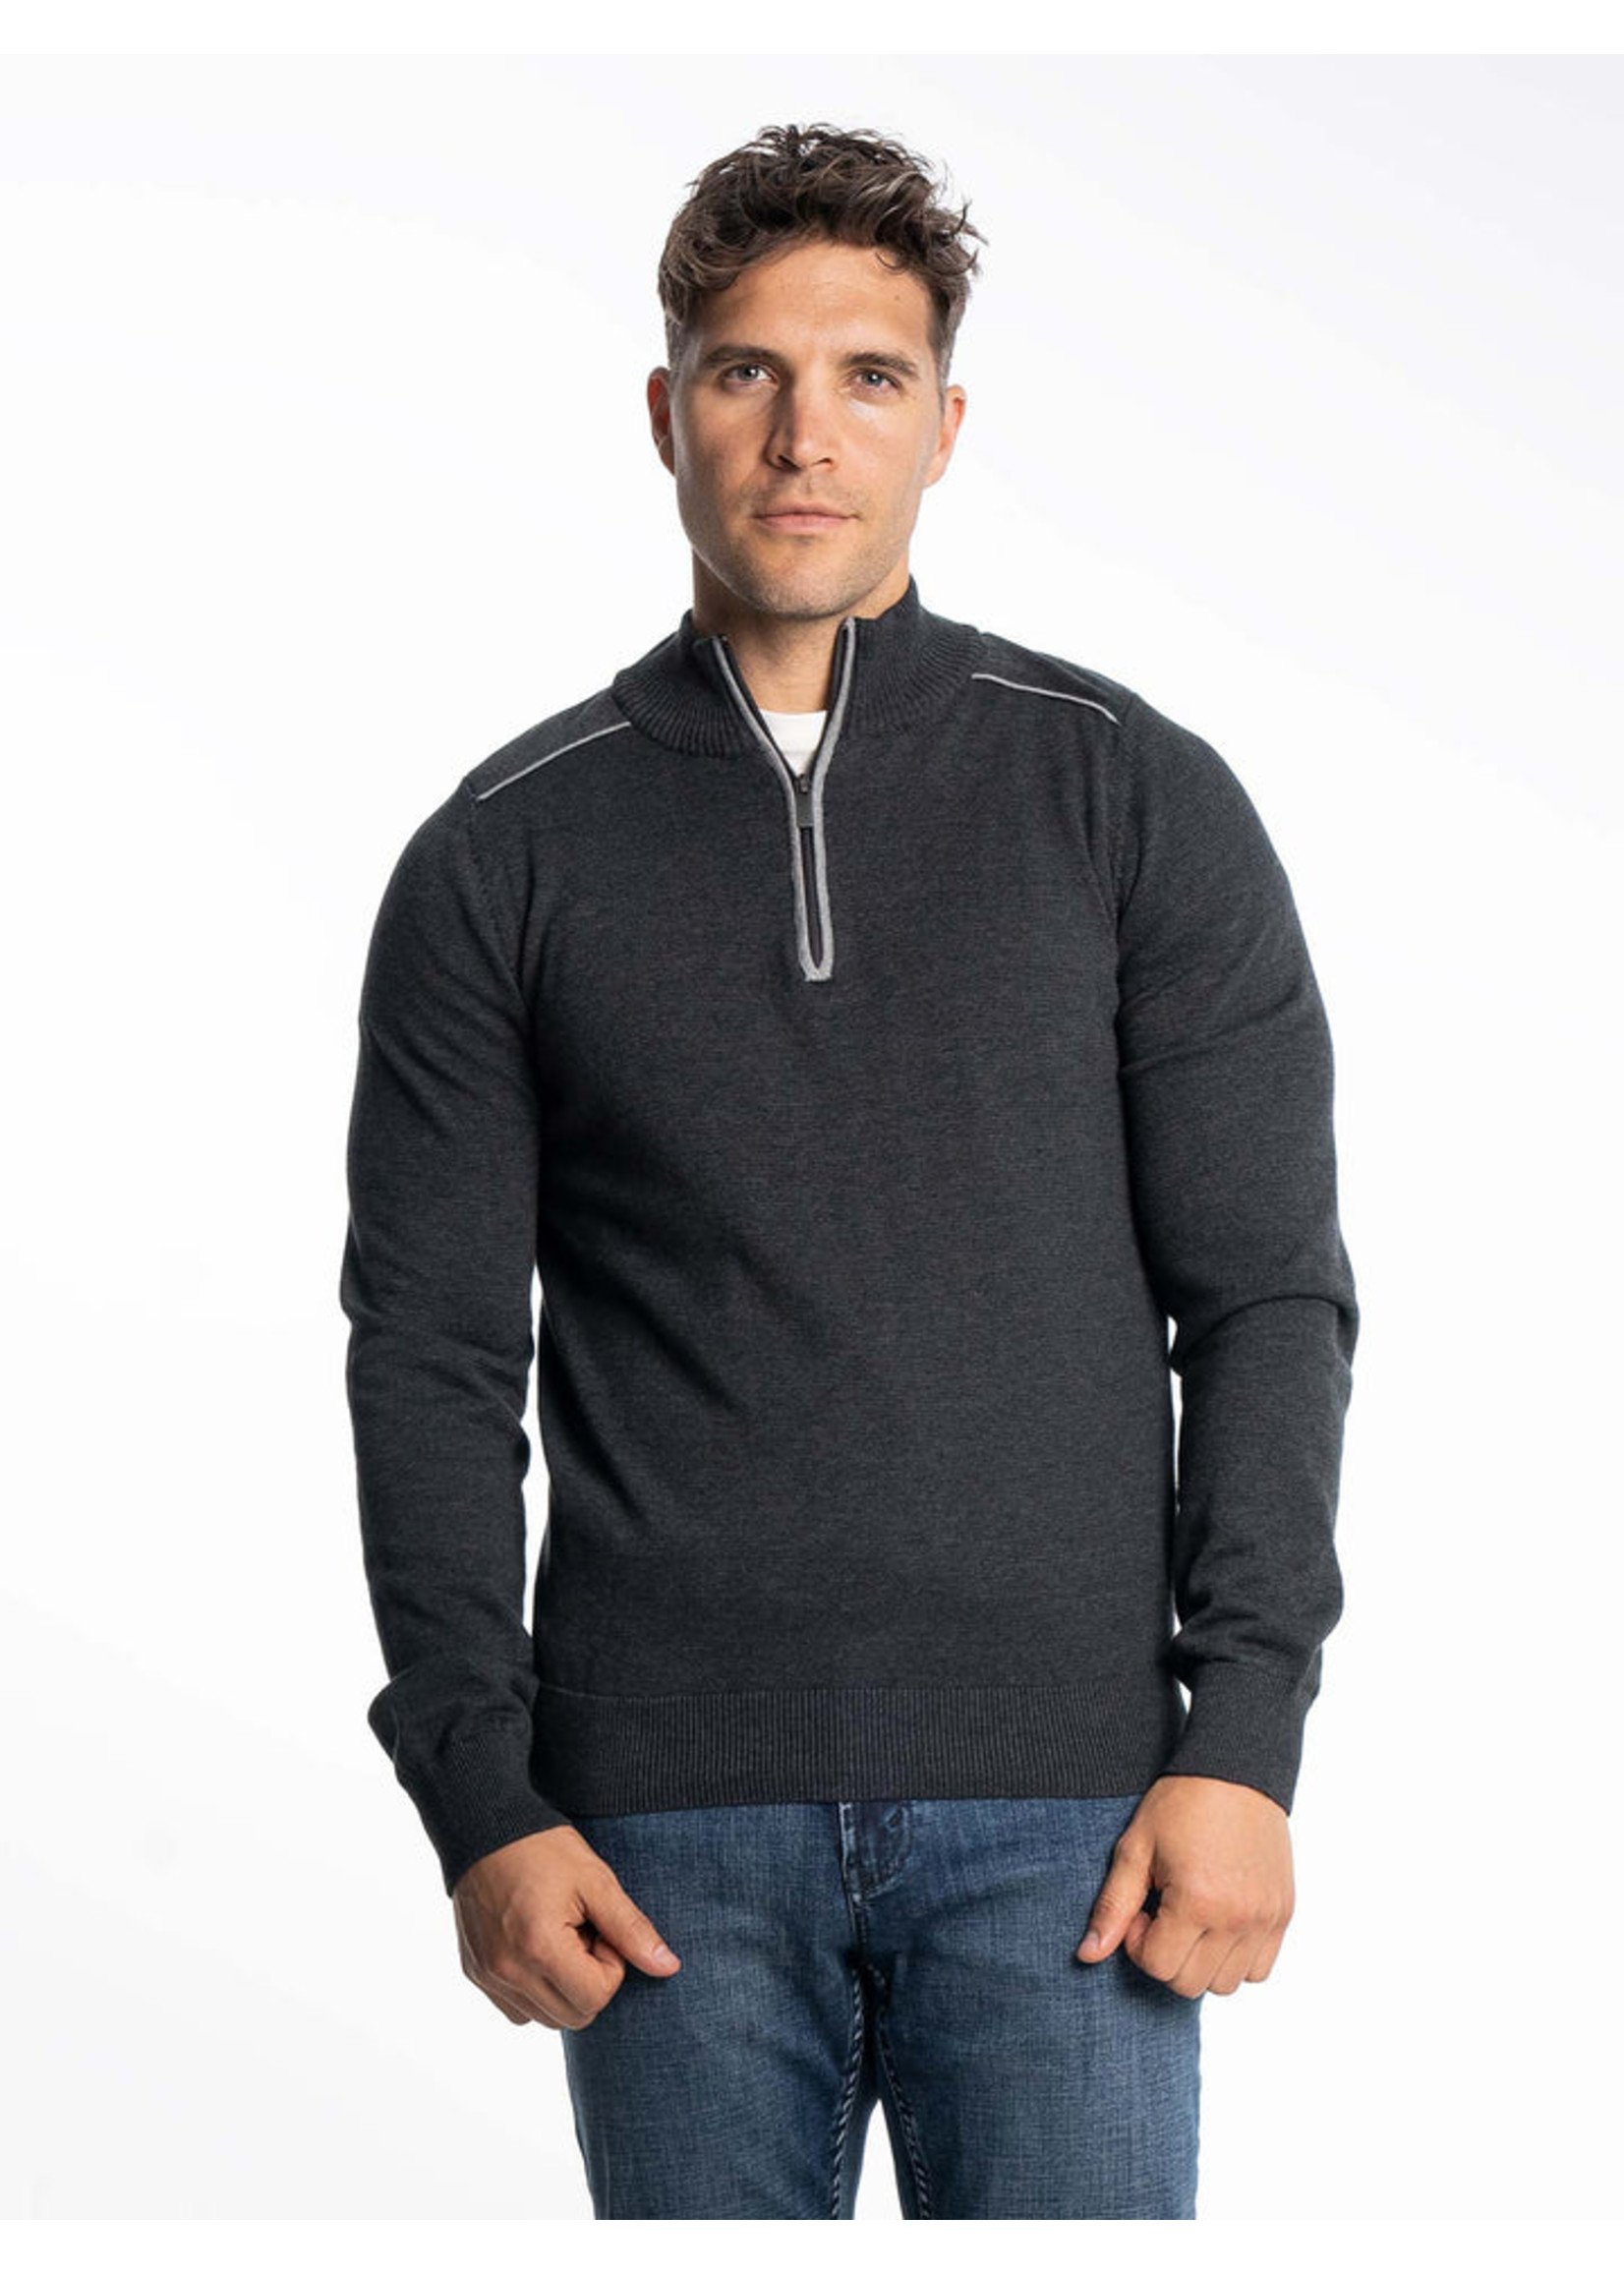 LOIS JEANS & JACKETS Men's Ford 1/4 zip sweater